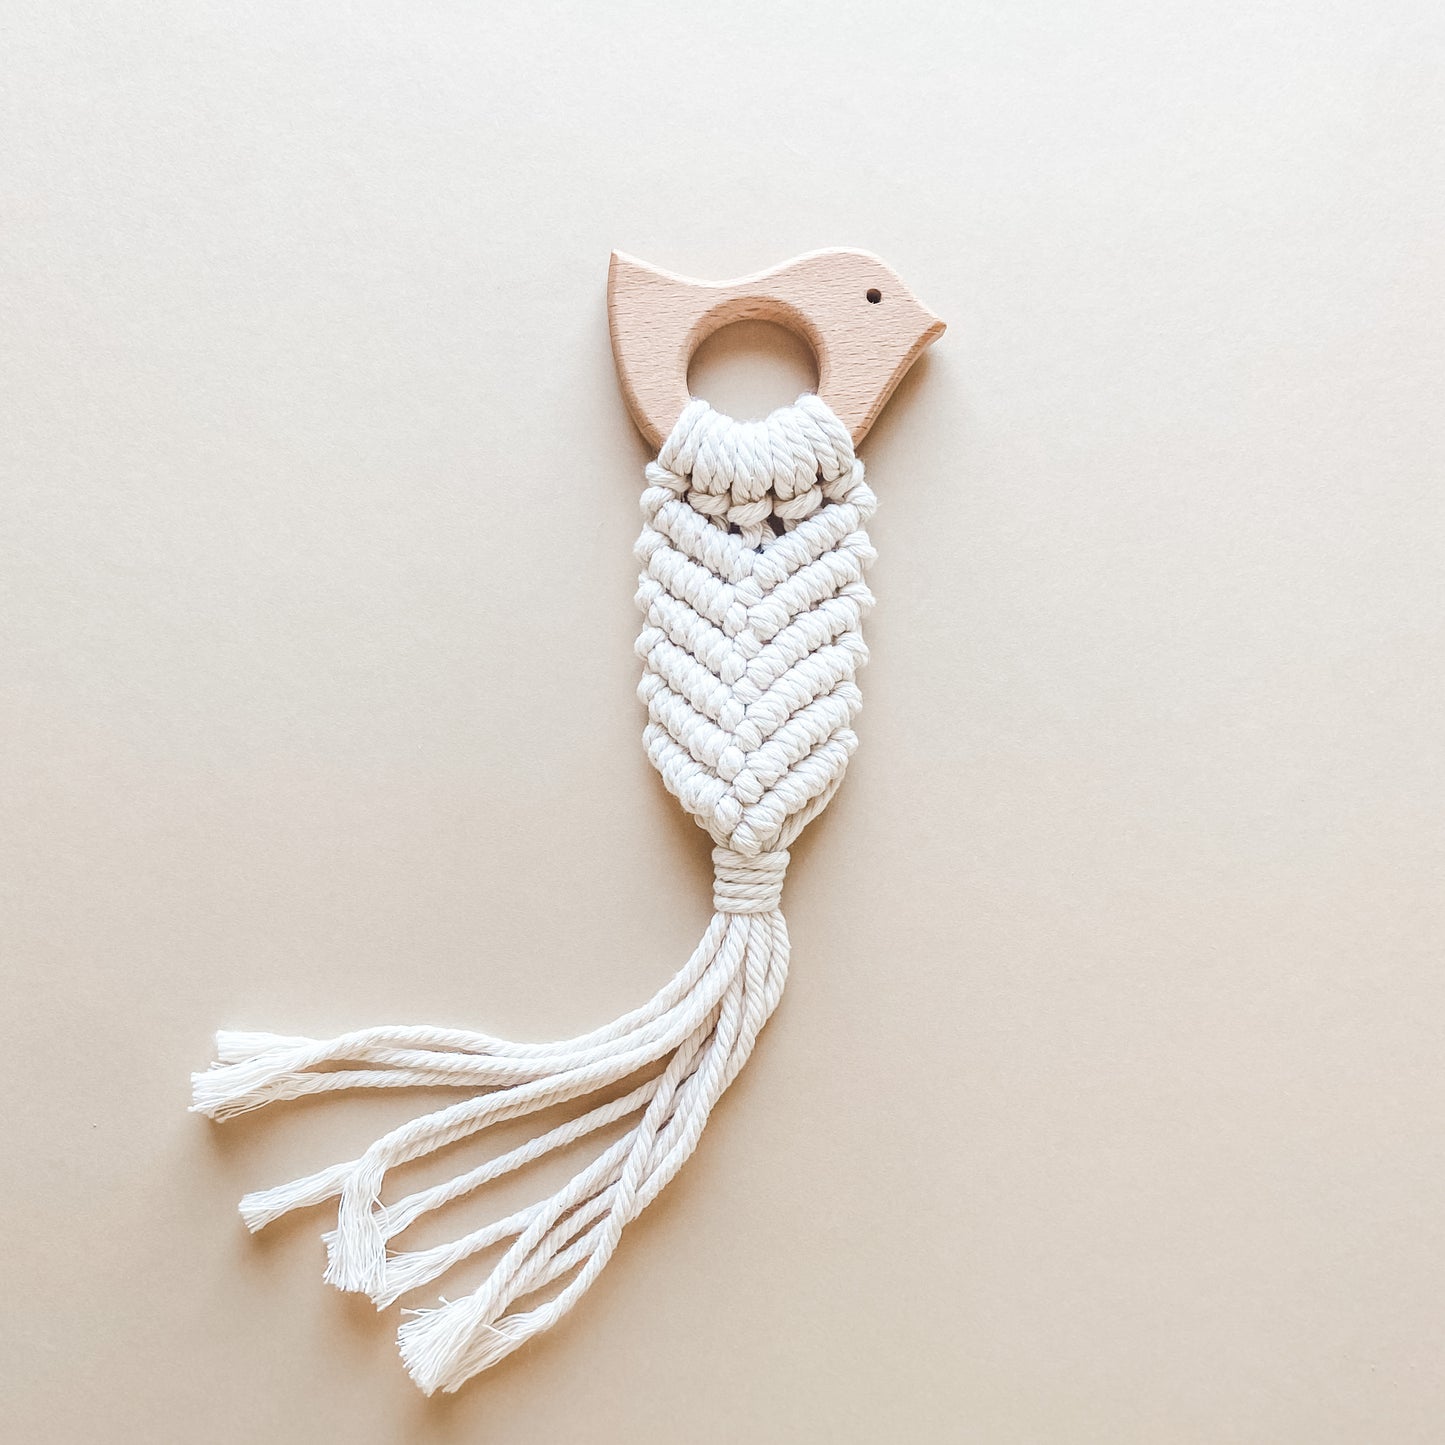 Paloma, Fly with Me Macrame Teethers